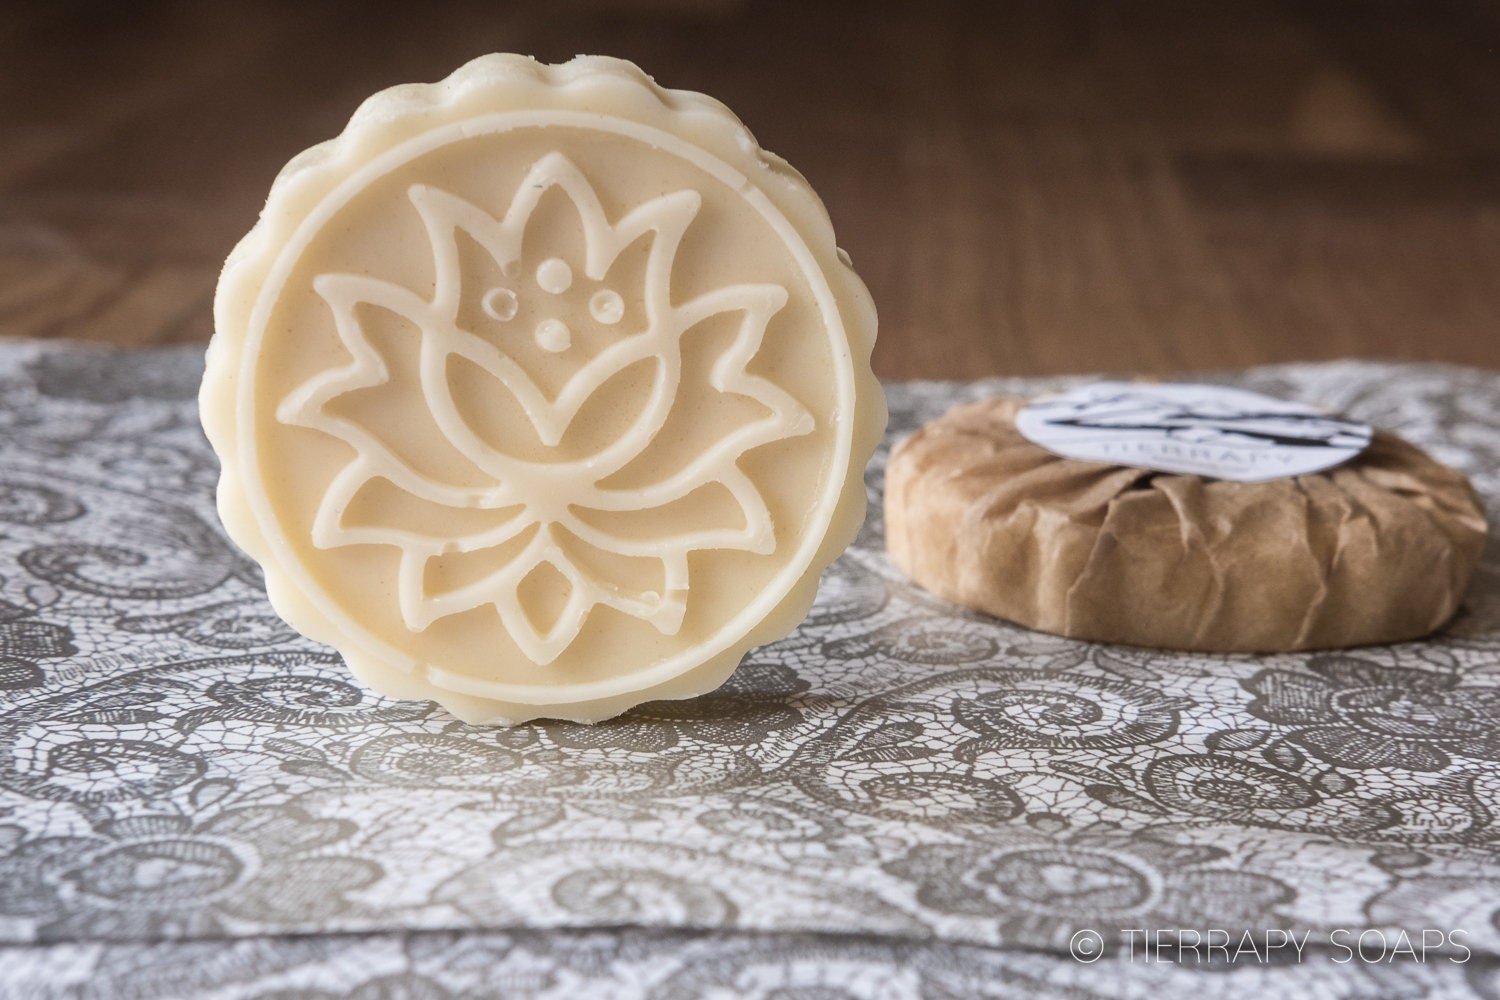 Solid Lotion Bar Unscented